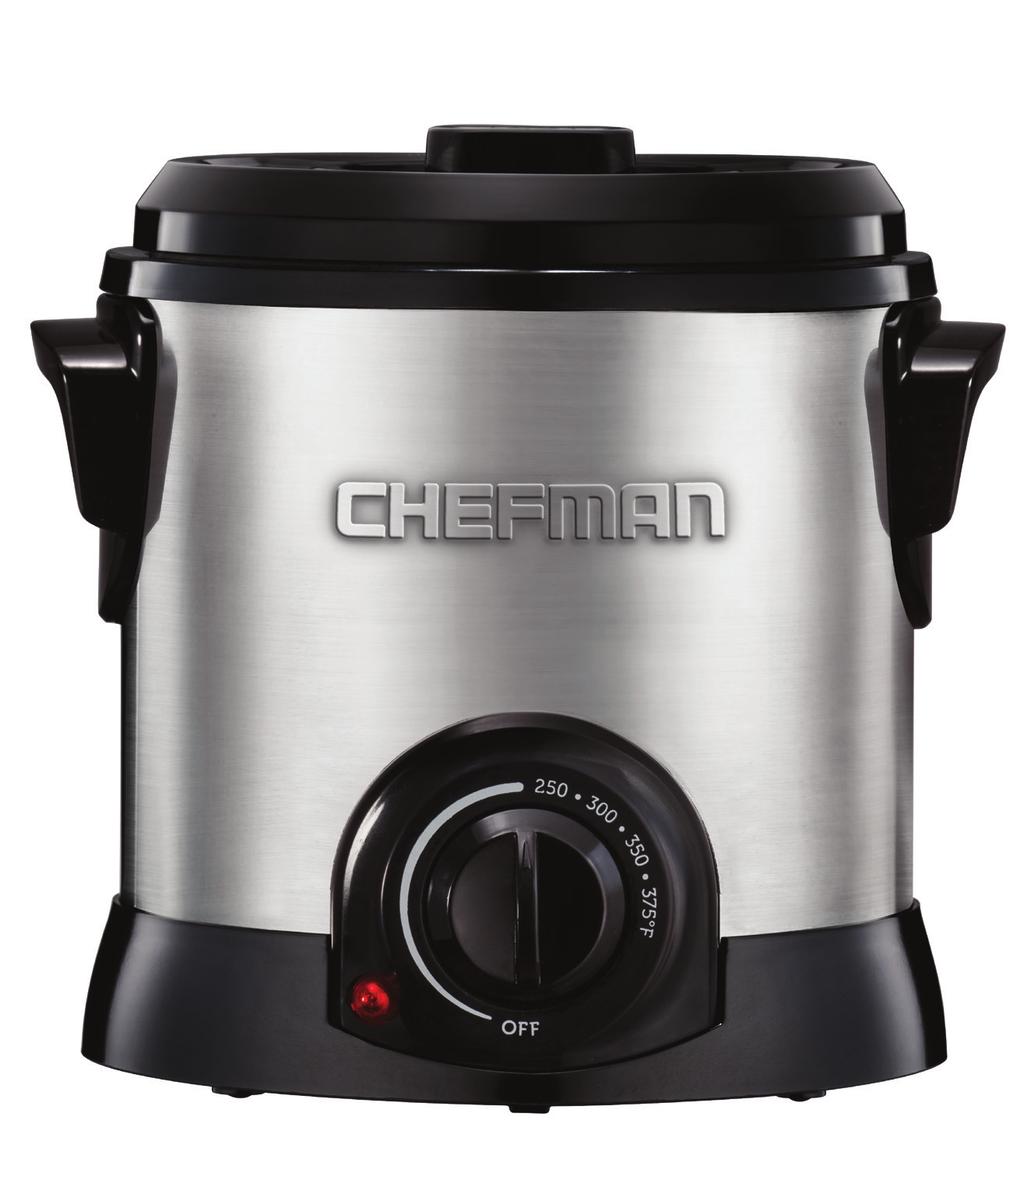 The Fry Guy Deep Fryer USER GUIDE Now that you have purchased a Chefman product you can rest assured in the knowledge that as well as your 1-year parts and labor warranty you have the added peace of